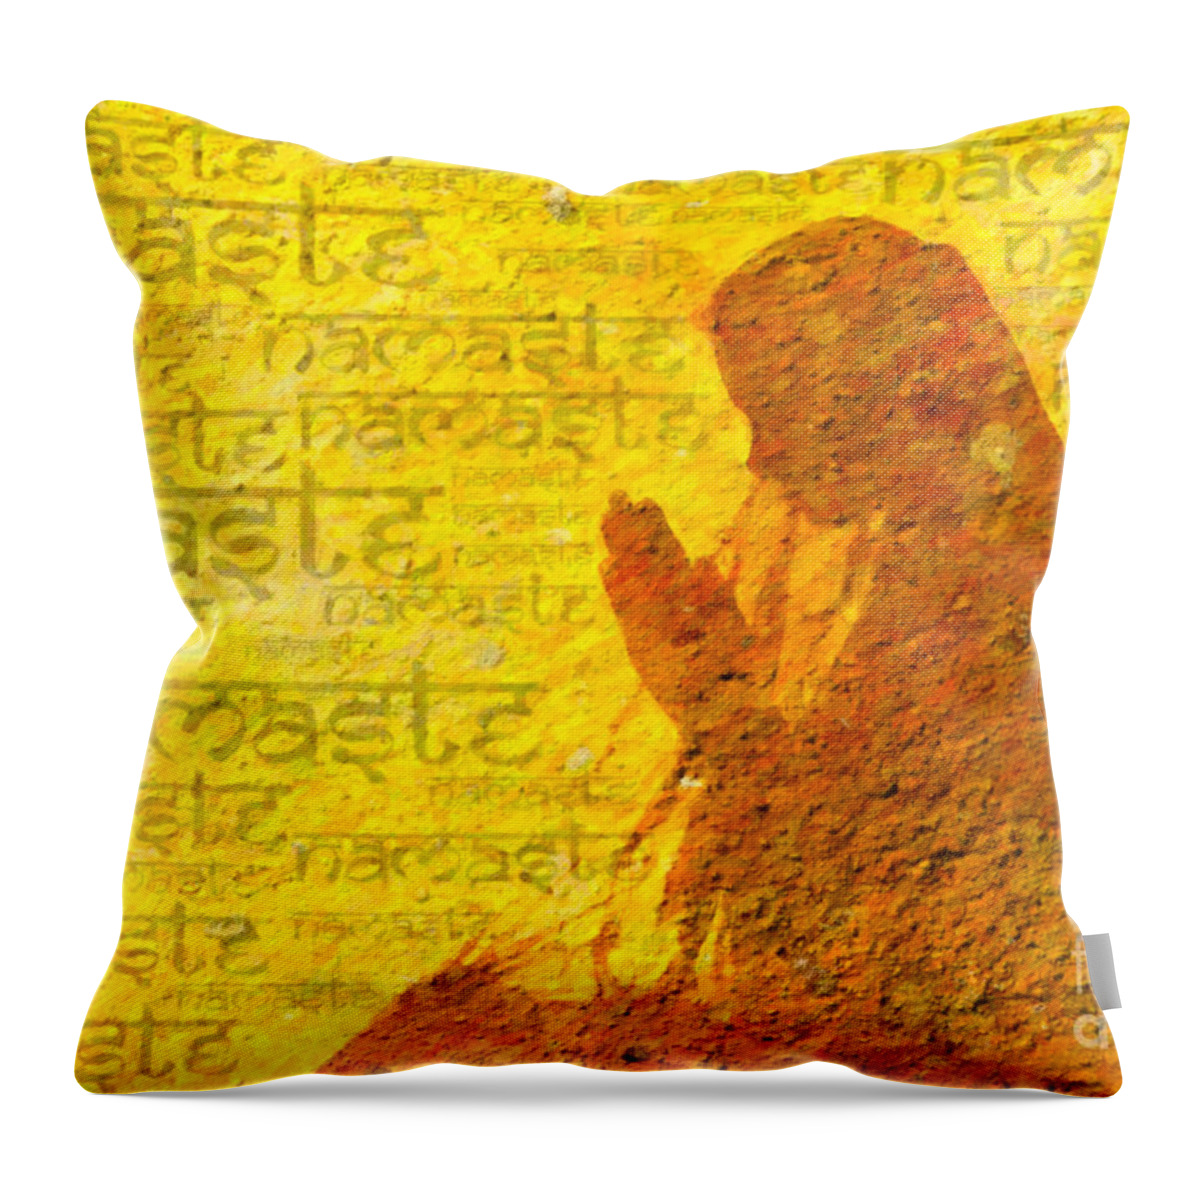 Indian Girl Throw Pillow featuring the digital art Namaste by Tim Gainey